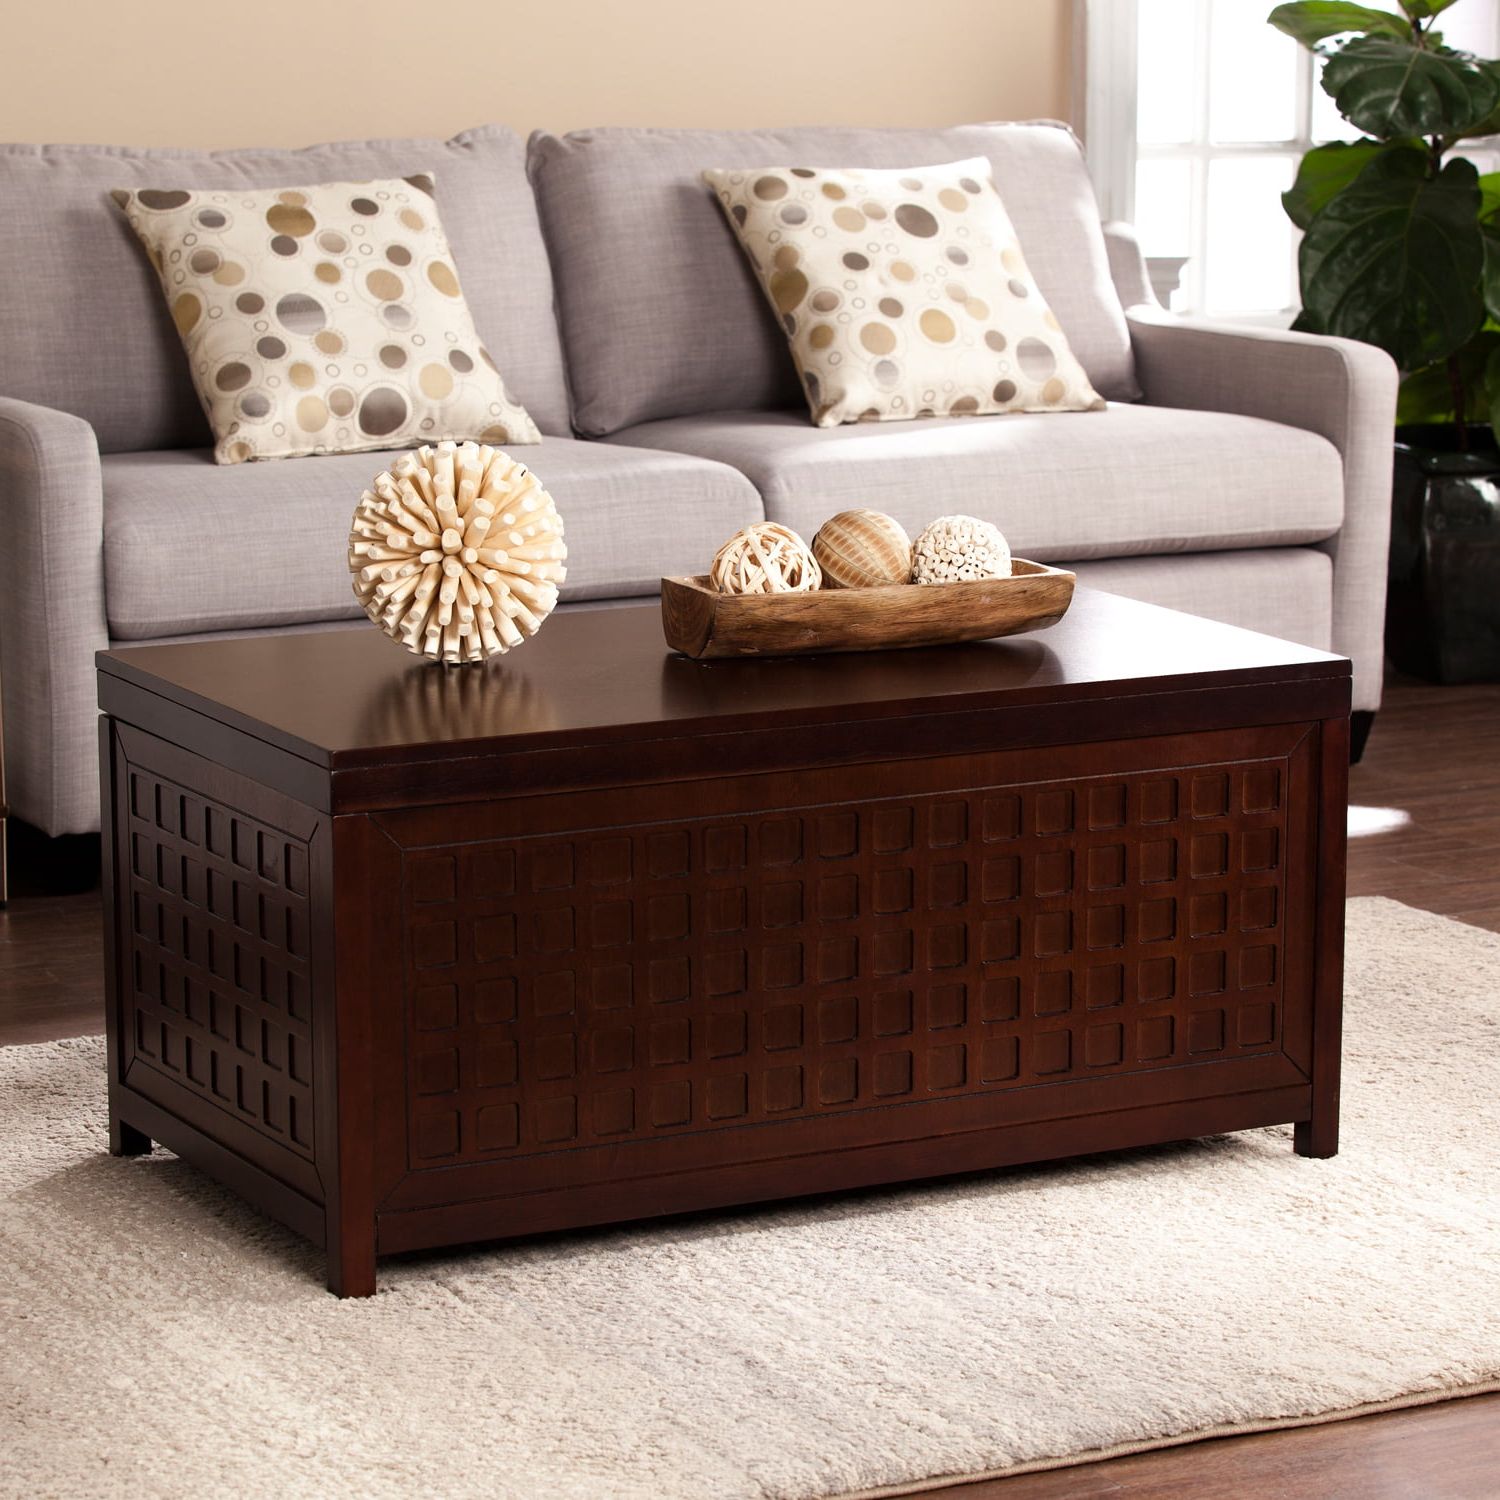 Southern Enterprises Alva Coffee Trunk Table, Espresso – Walmart Within Southern Enterprises Larksmill Coffee Tables (View 5 of 20)